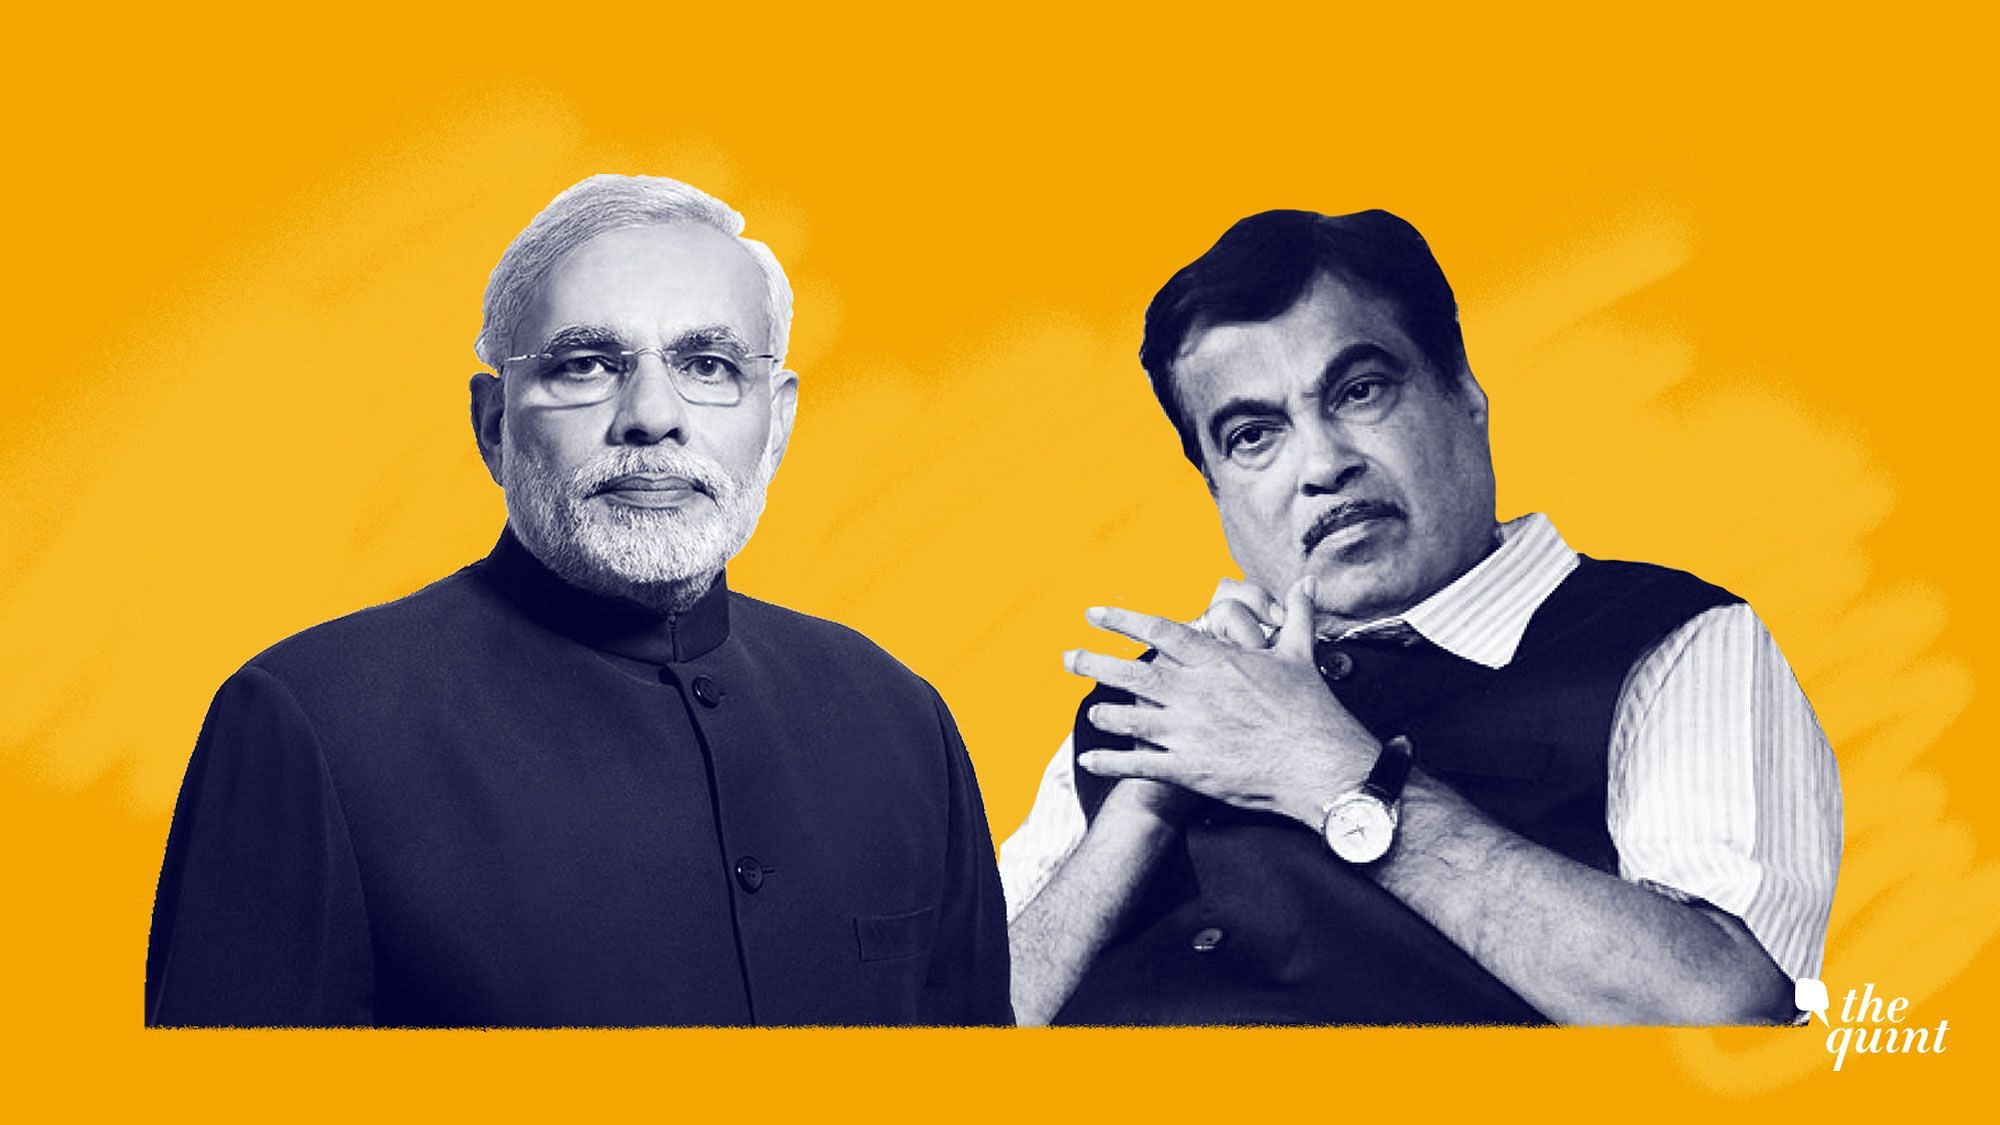 With the general elections around the corner, the shadow power play between Modi &amp; Gadkari has intensified. Image used for representational purposes.